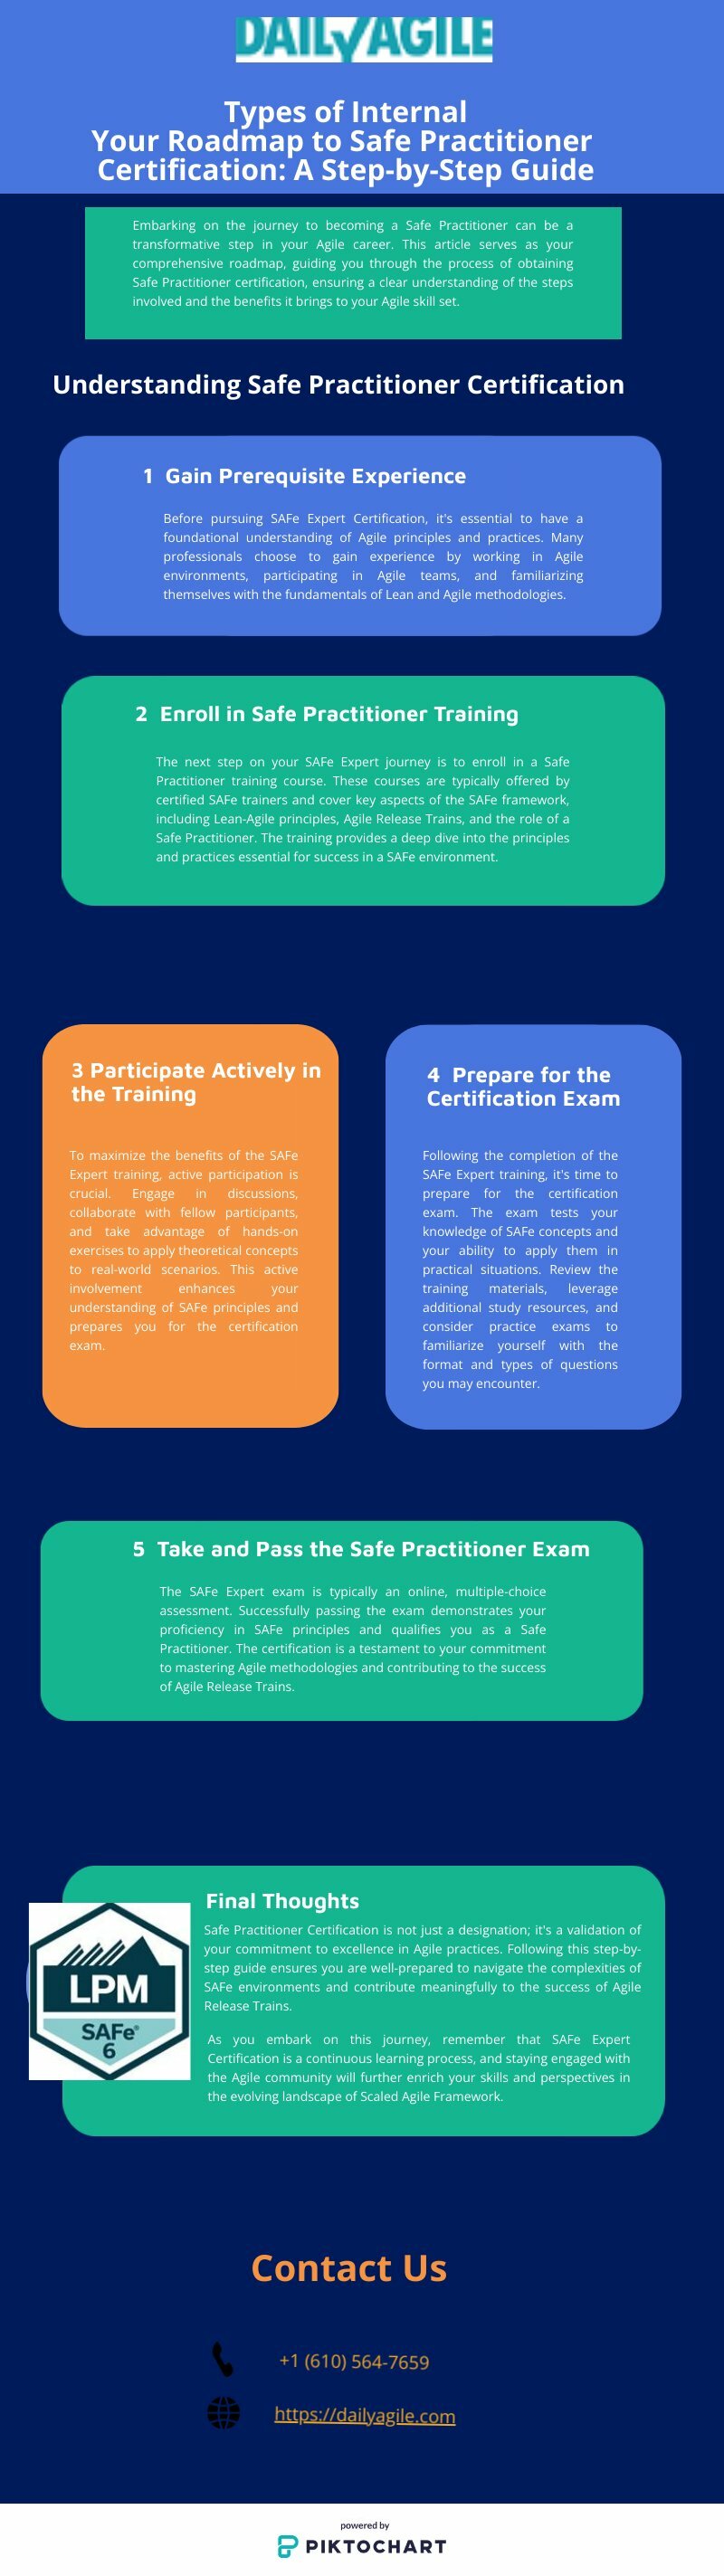 Types of Internal Your Roadmap to Safe Practitioner Certification: A Step-by-Step Guide